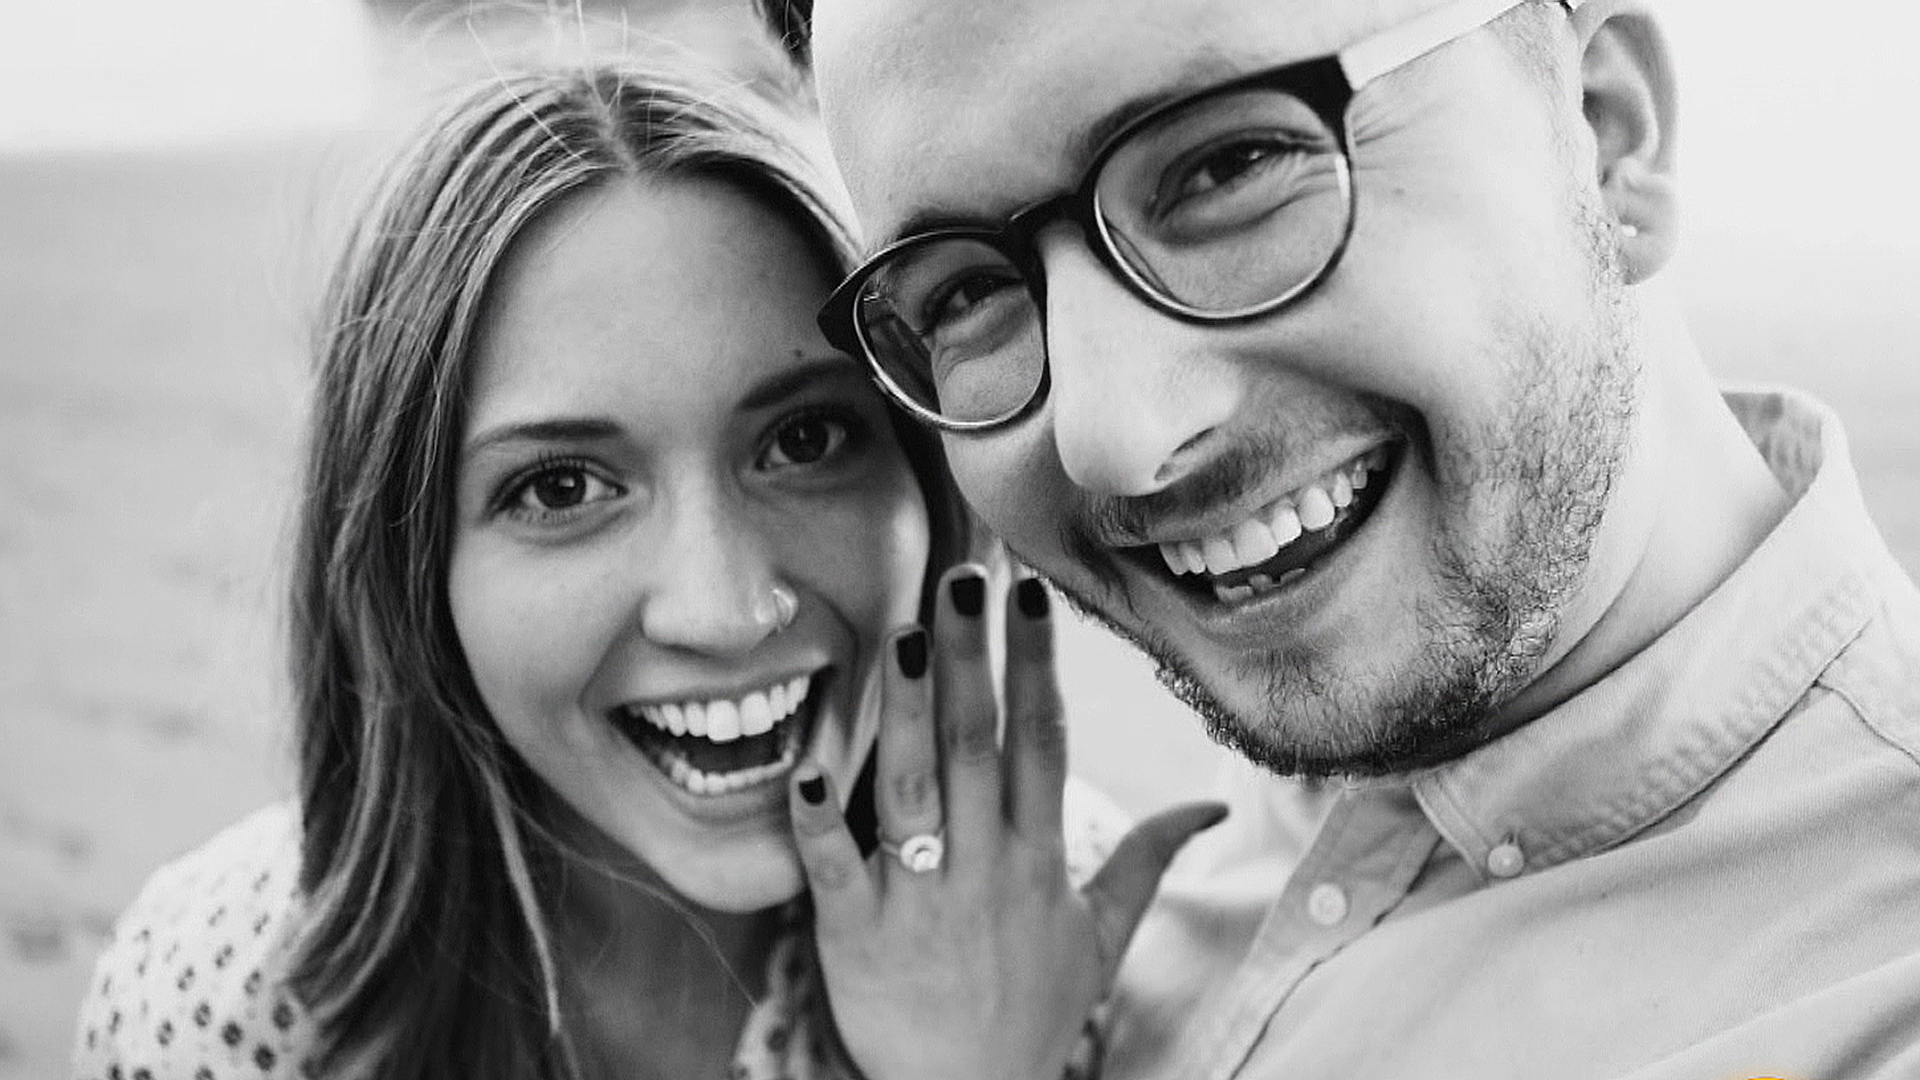 Meet a couple who fell in love, got engaged, on Instagram - TODAY.com